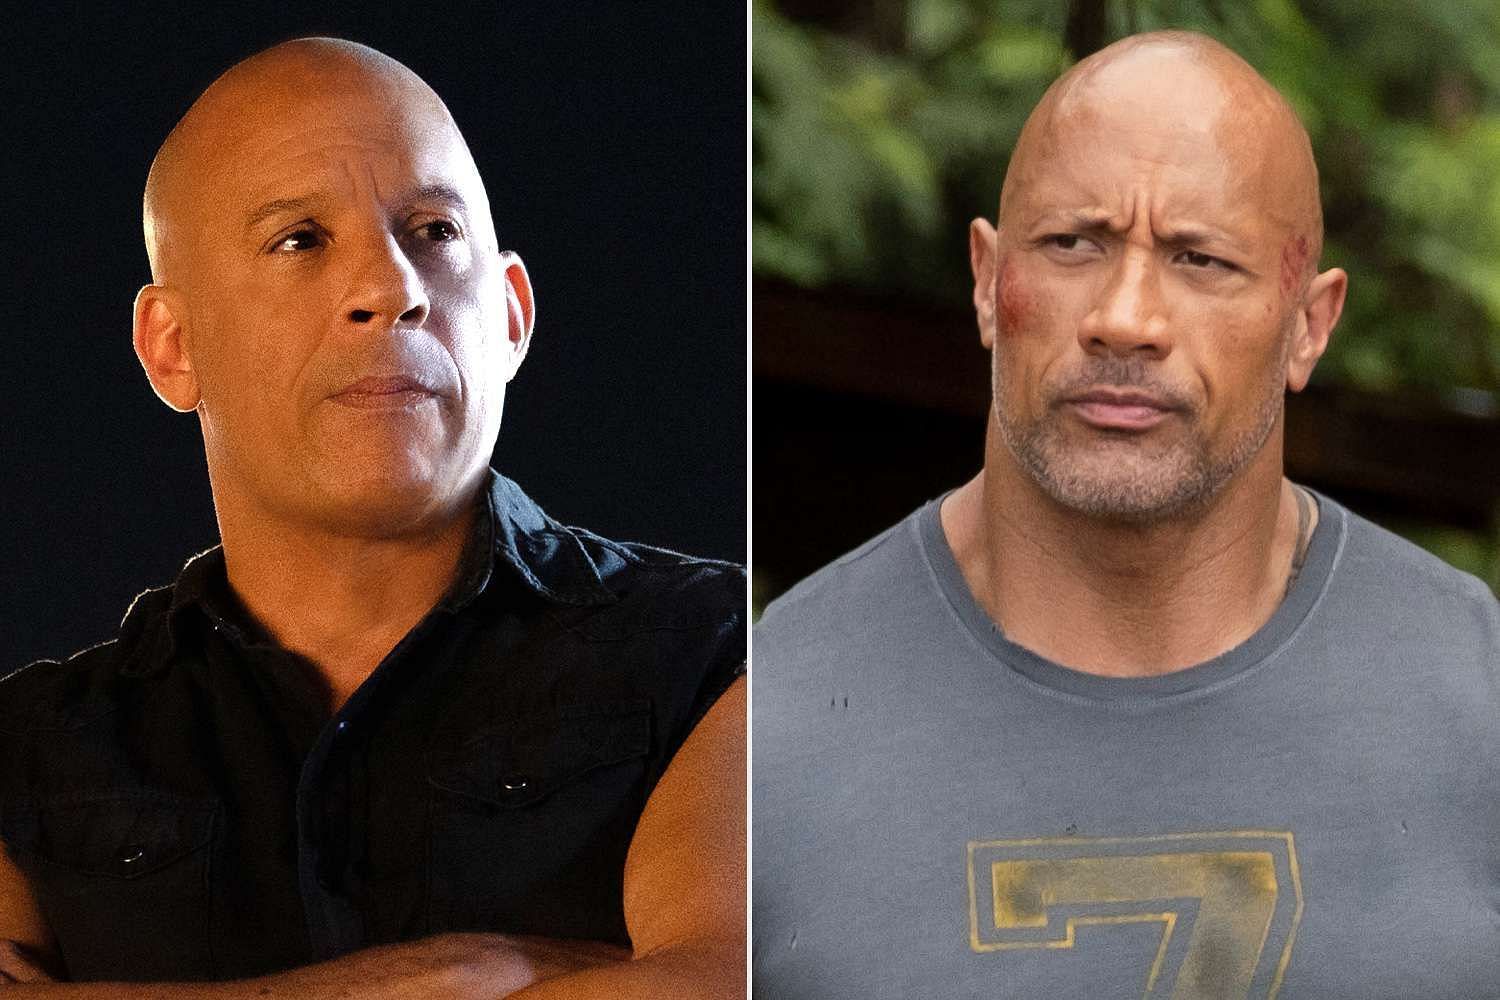 Dwayne Johnson could return in Fast 11 to continue as Luke Hobbs (Image via Universal)